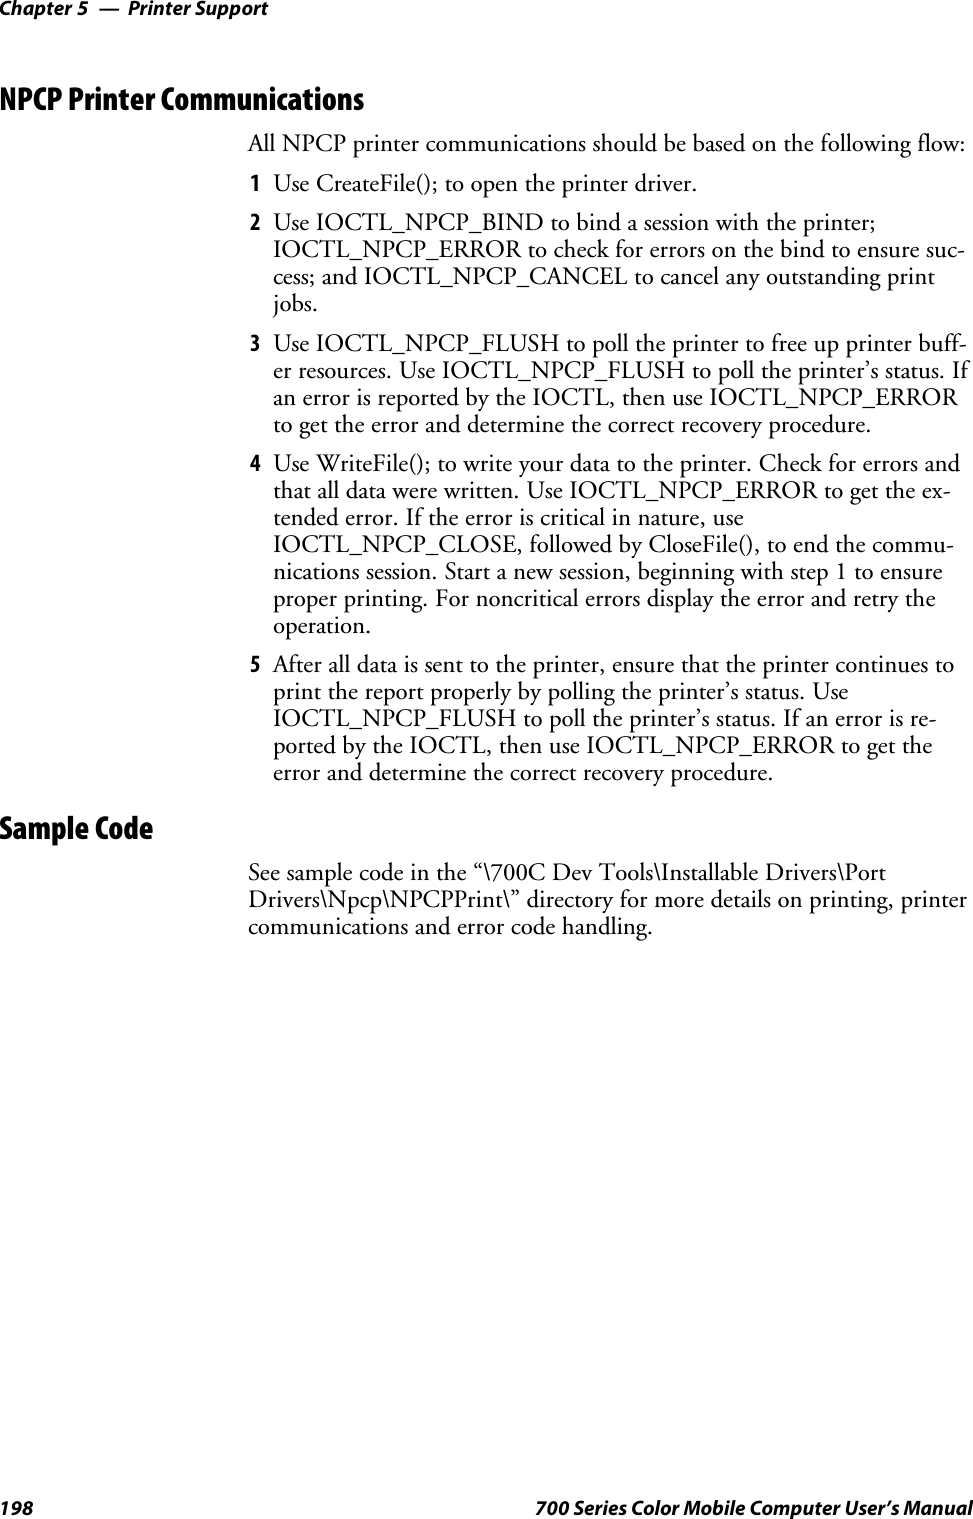 Printer SupportChapter —5198 700 Series Color Mobile Computer User’s ManualNPCP Printer CommunicationsAll NPCP printer communications should be based on the following flow:1Use CreateFile(); to open the printer driver.2Use IOCTL_NPCP_BIND to bind a session with the printer;IOCTL_NPCP_ERROR to check for errors on the bind to ensure suc-cess; and IOCTL_NPCP_CANCEL to cancel any outstanding printjobs.3Use IOCTL_NPCP_FLUSH to poll the printer to free up printer buff-er resources. Use IOCTL_NPCP_FLUSH to poll the printer’s status. Ifan error is reported by the IOCTL, then use IOCTL_NPCP_ERRORto get the error and determine the correct recovery procedure.4Use WriteFile(); to write your data to the printer. Check for errors andthat all data were written. Use IOCTL_NPCP_ERROR to get the ex-tended error. If the error is critical in nature, useIOCTL_NPCP_CLOSE, followed by CloseFile(), to end the commu-nications session. Start a new session, beginning with step 1 to ensureproper printing. For noncritical errors display the error and retry theoperation.5After all data is sent to the printer, ensure that the printer continues toprint the report properly by polling the printer’s status. UseIOCTL_NPCP_FLUSH to poll the printer’s status. If an error is re-ported by the IOCTL, then use IOCTL_NPCP_ERROR to get theerror and determine the correct recovery procedure.Sample CodeSee sample code in the “\700C Dev Tools\Installable Drivers\PortDrivers\Npcp\NPCPPrint\” directory for more details on printing, printercommunications and error code handling.